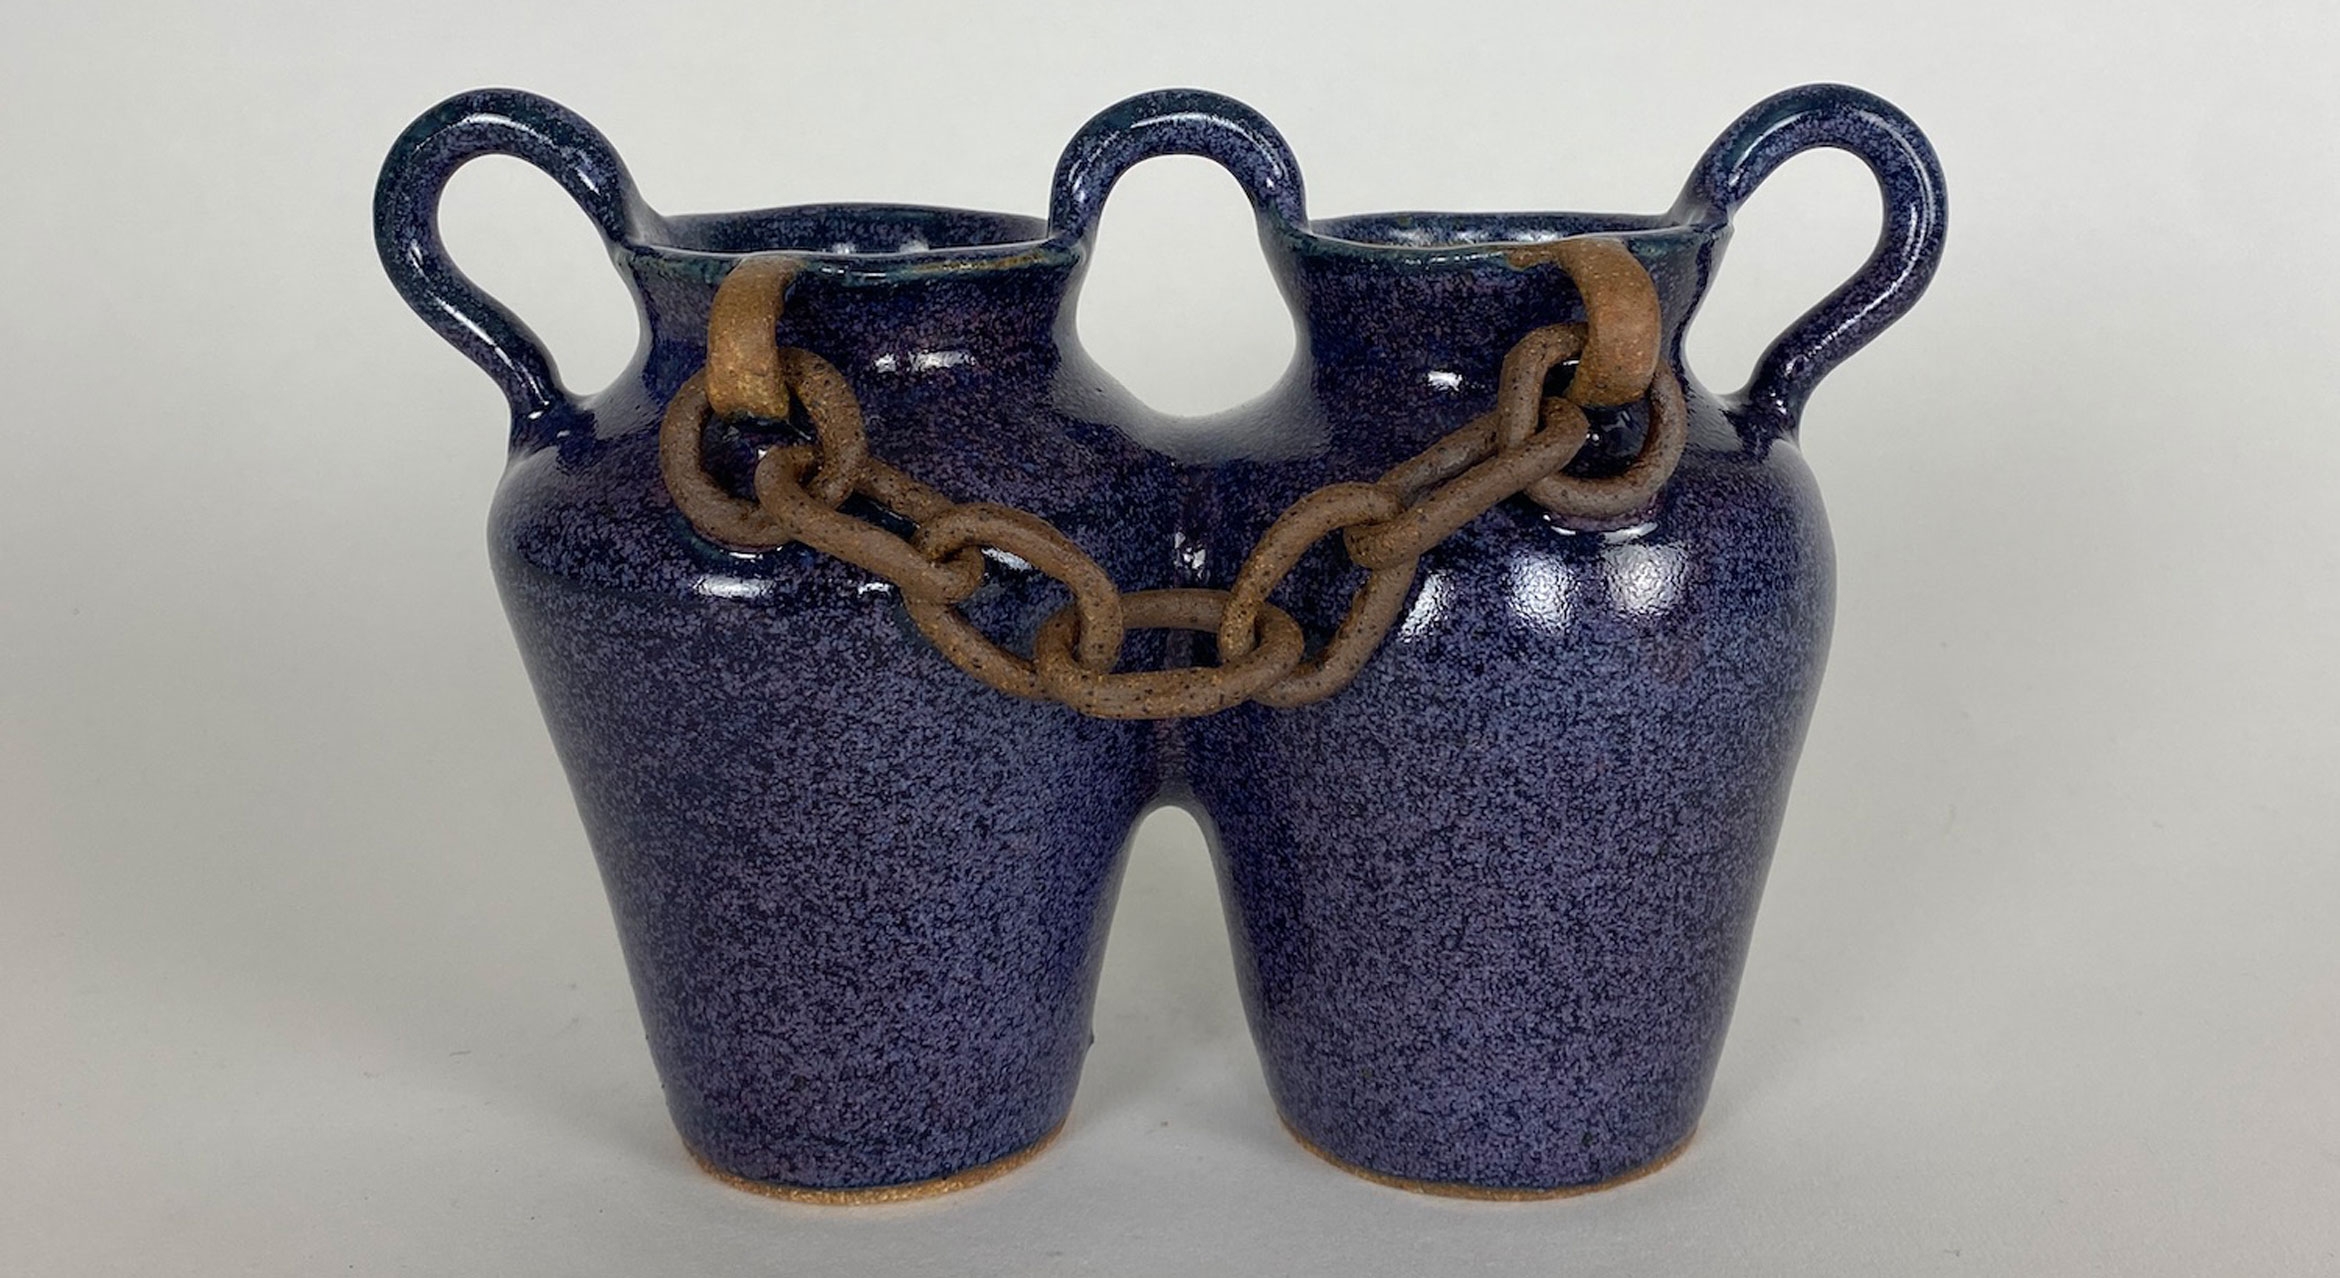 two pots in one piece